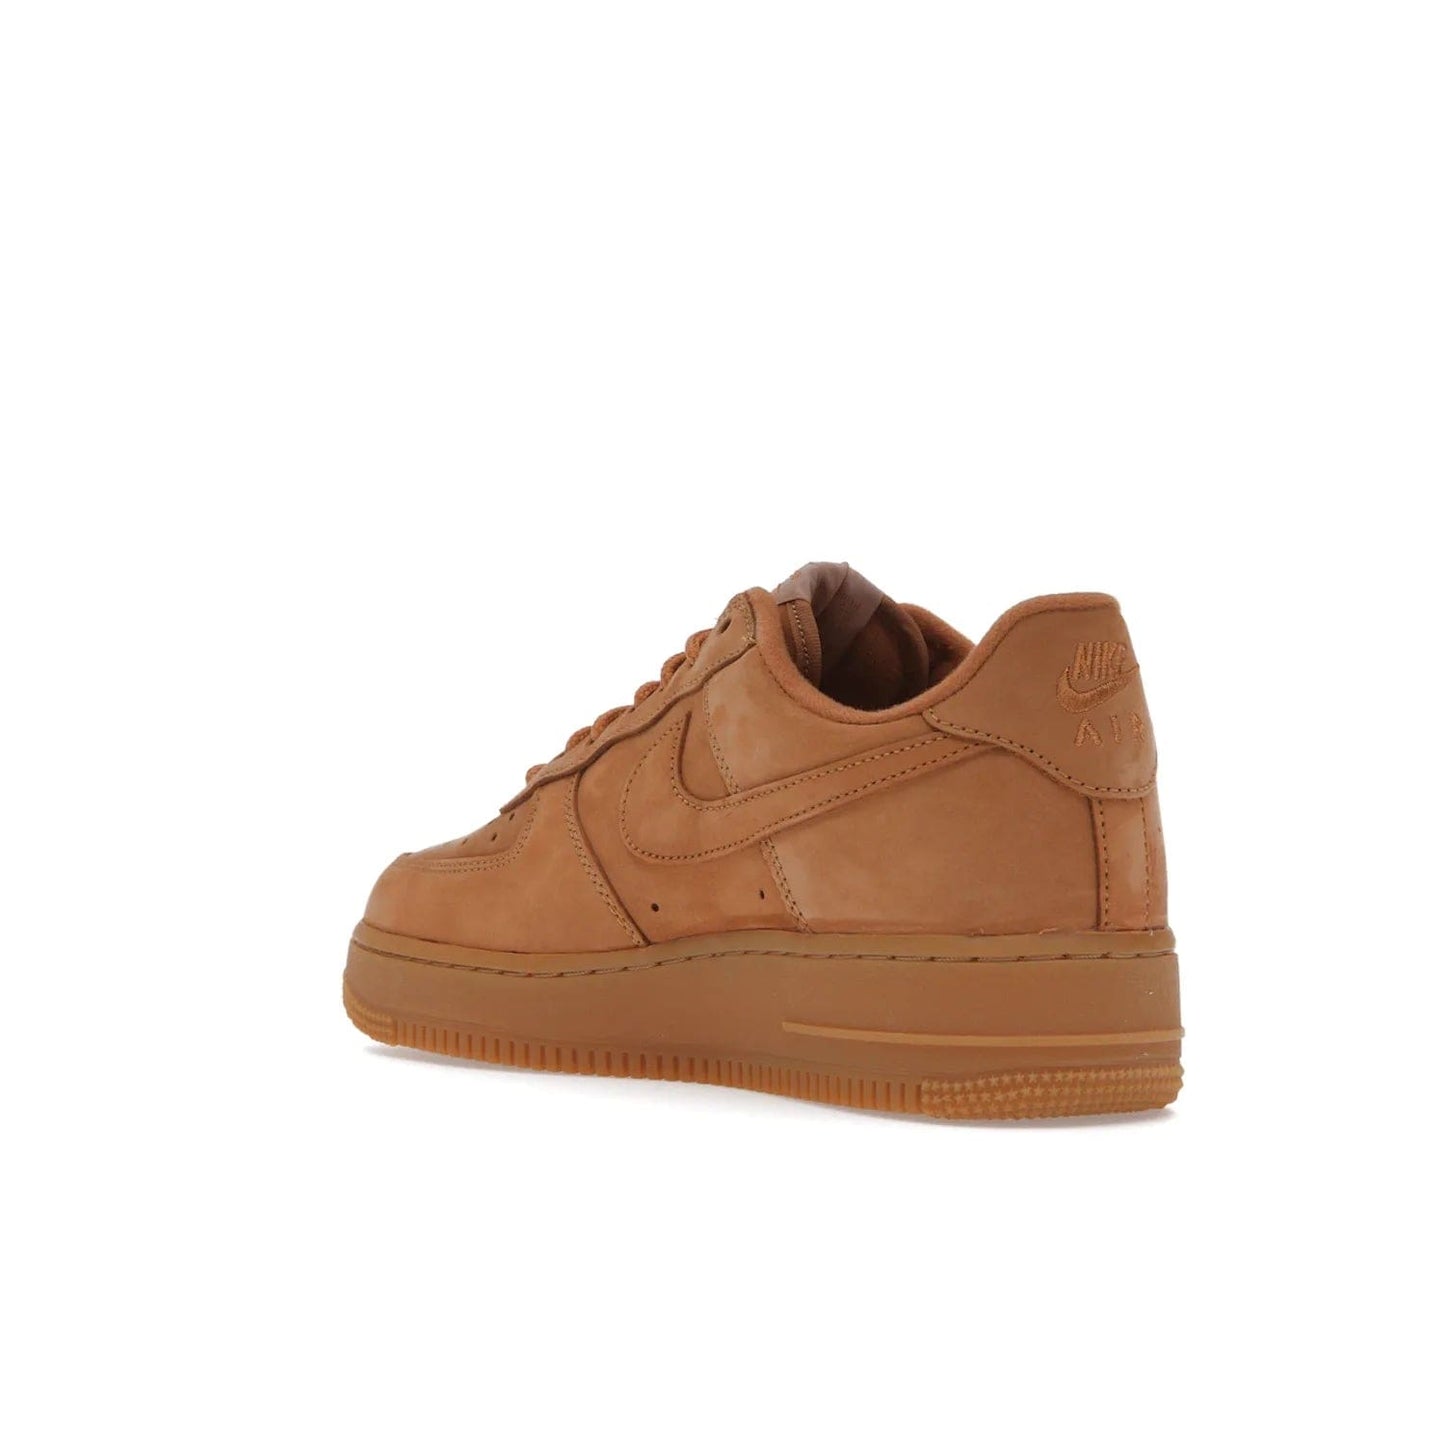 Nike Air Force 1 Low SP Supreme Wheat - Image 24 - Only at www.BallersClubKickz.com - A luxe Flax Durabuck upper and Supreme Box Logo insignias on the lateral heels make the Nike Air Force 1 Low SP Supreme Wheat a stylish lifestyle shoe. Matching Flax Air sole adds a classic touch to this collaboration between Nike and Supreme. Make a statement with this edition of the classic Air Force 1 Low.